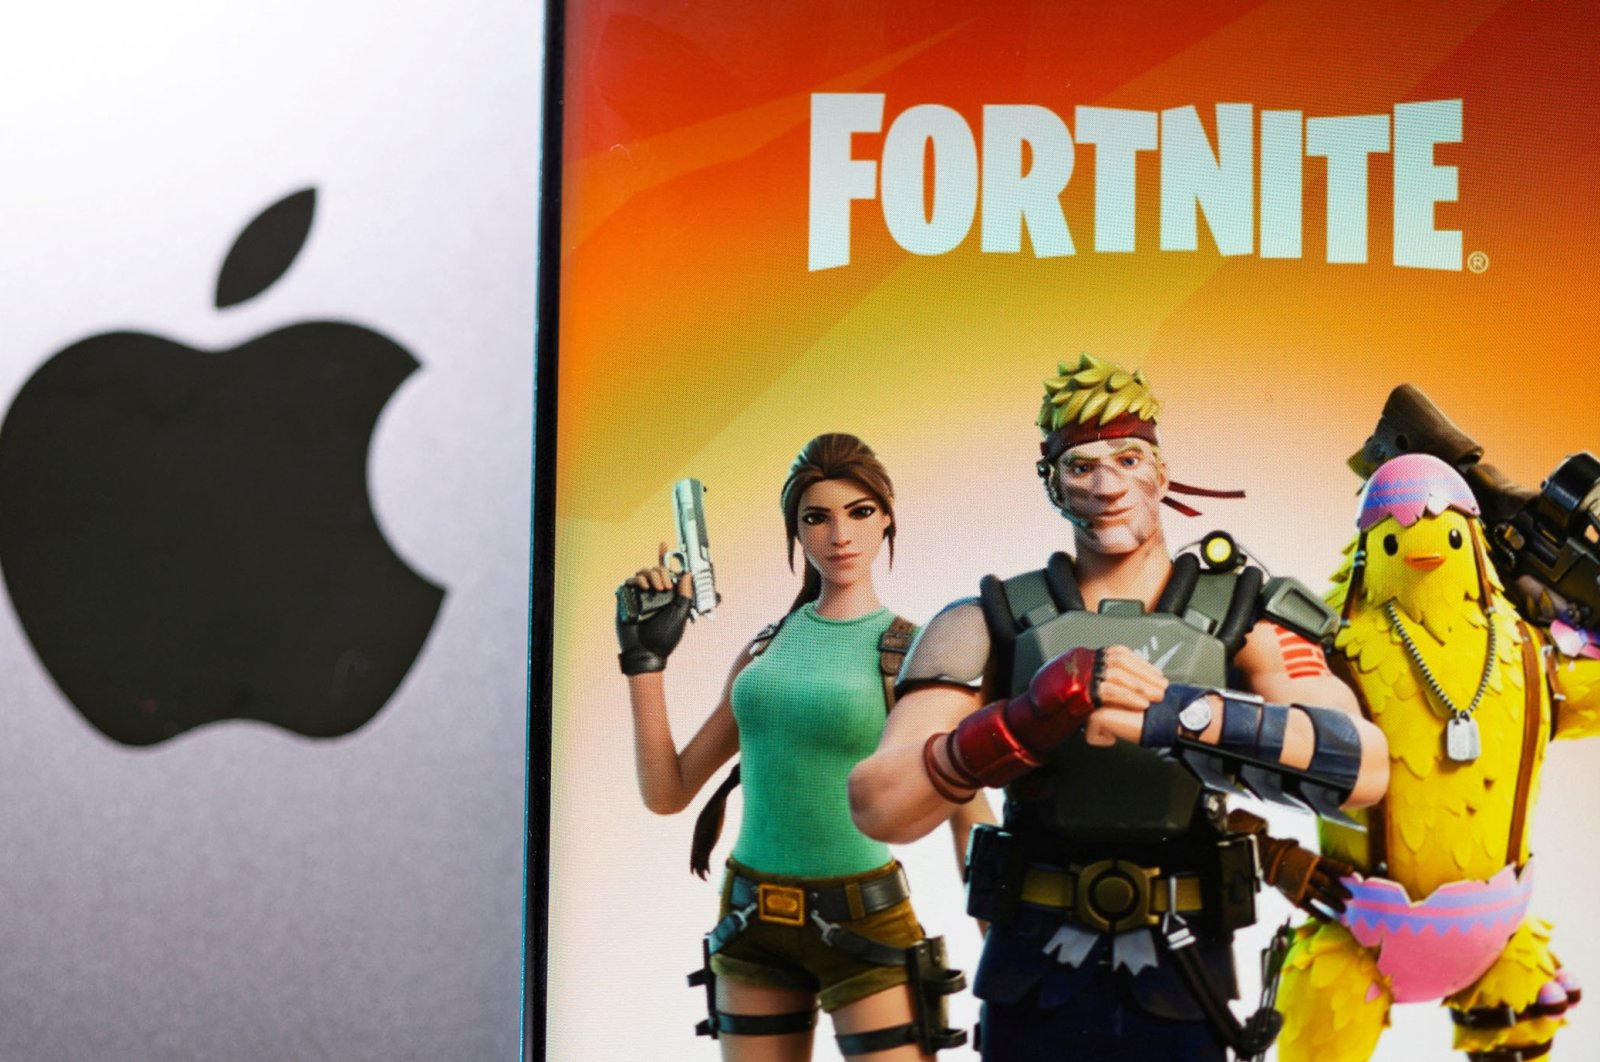 Fortnite game graphic is displayed on a smartphone in front of the Apple logo, May 2, 2021. (Reuters Photo)